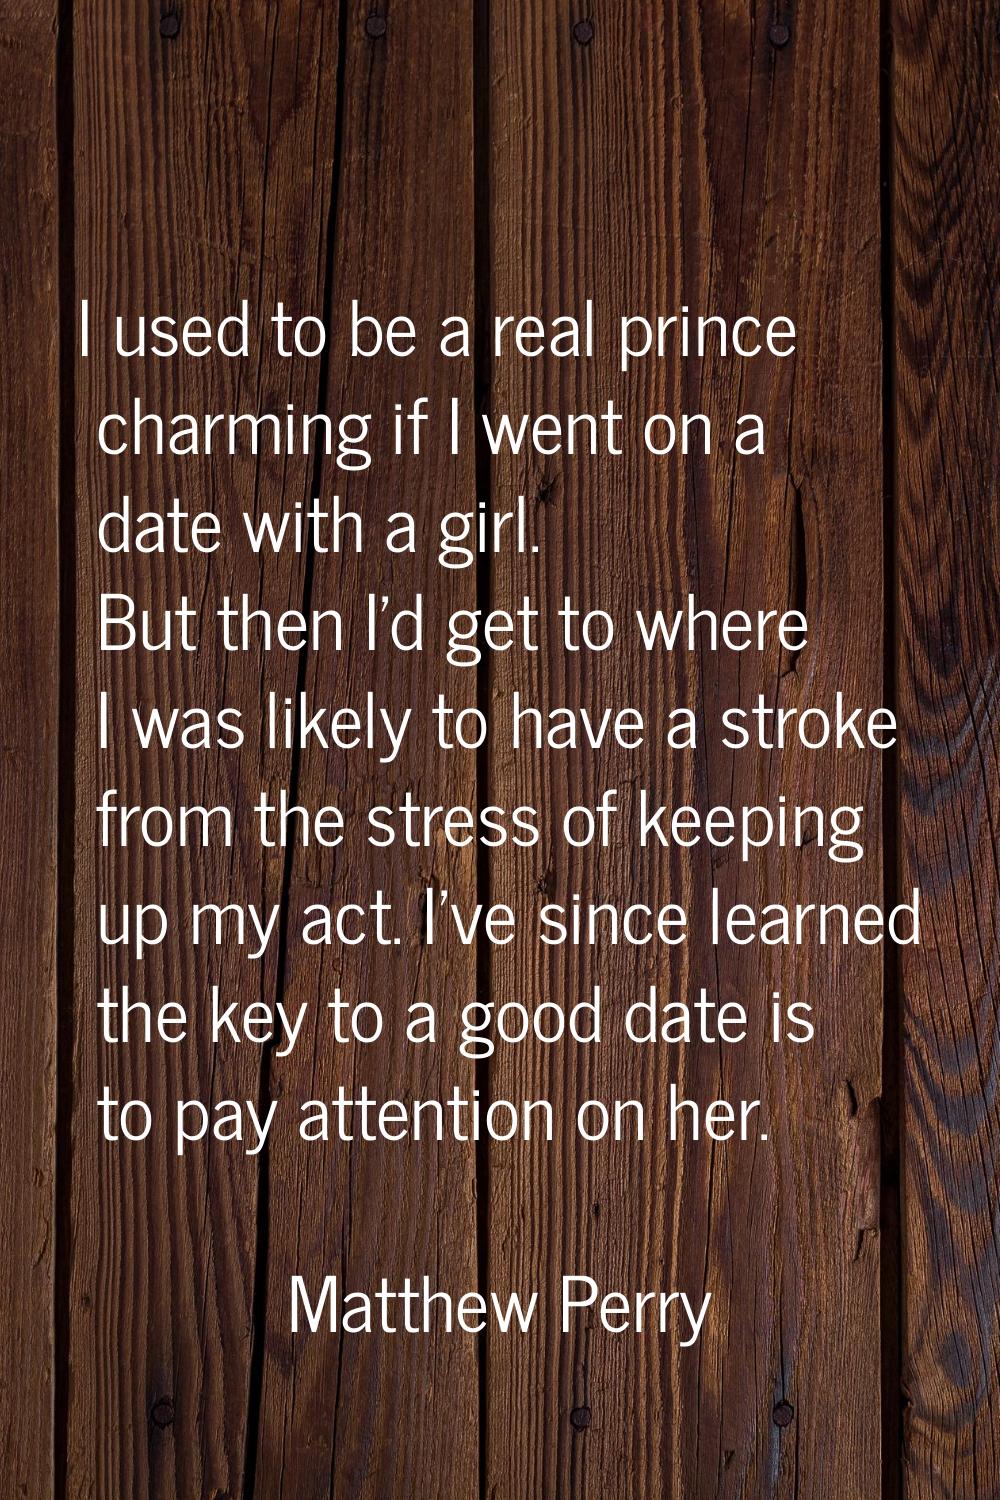 I used to be a real prince charming if I went on a date with a girl. But then I'd get to where I wa